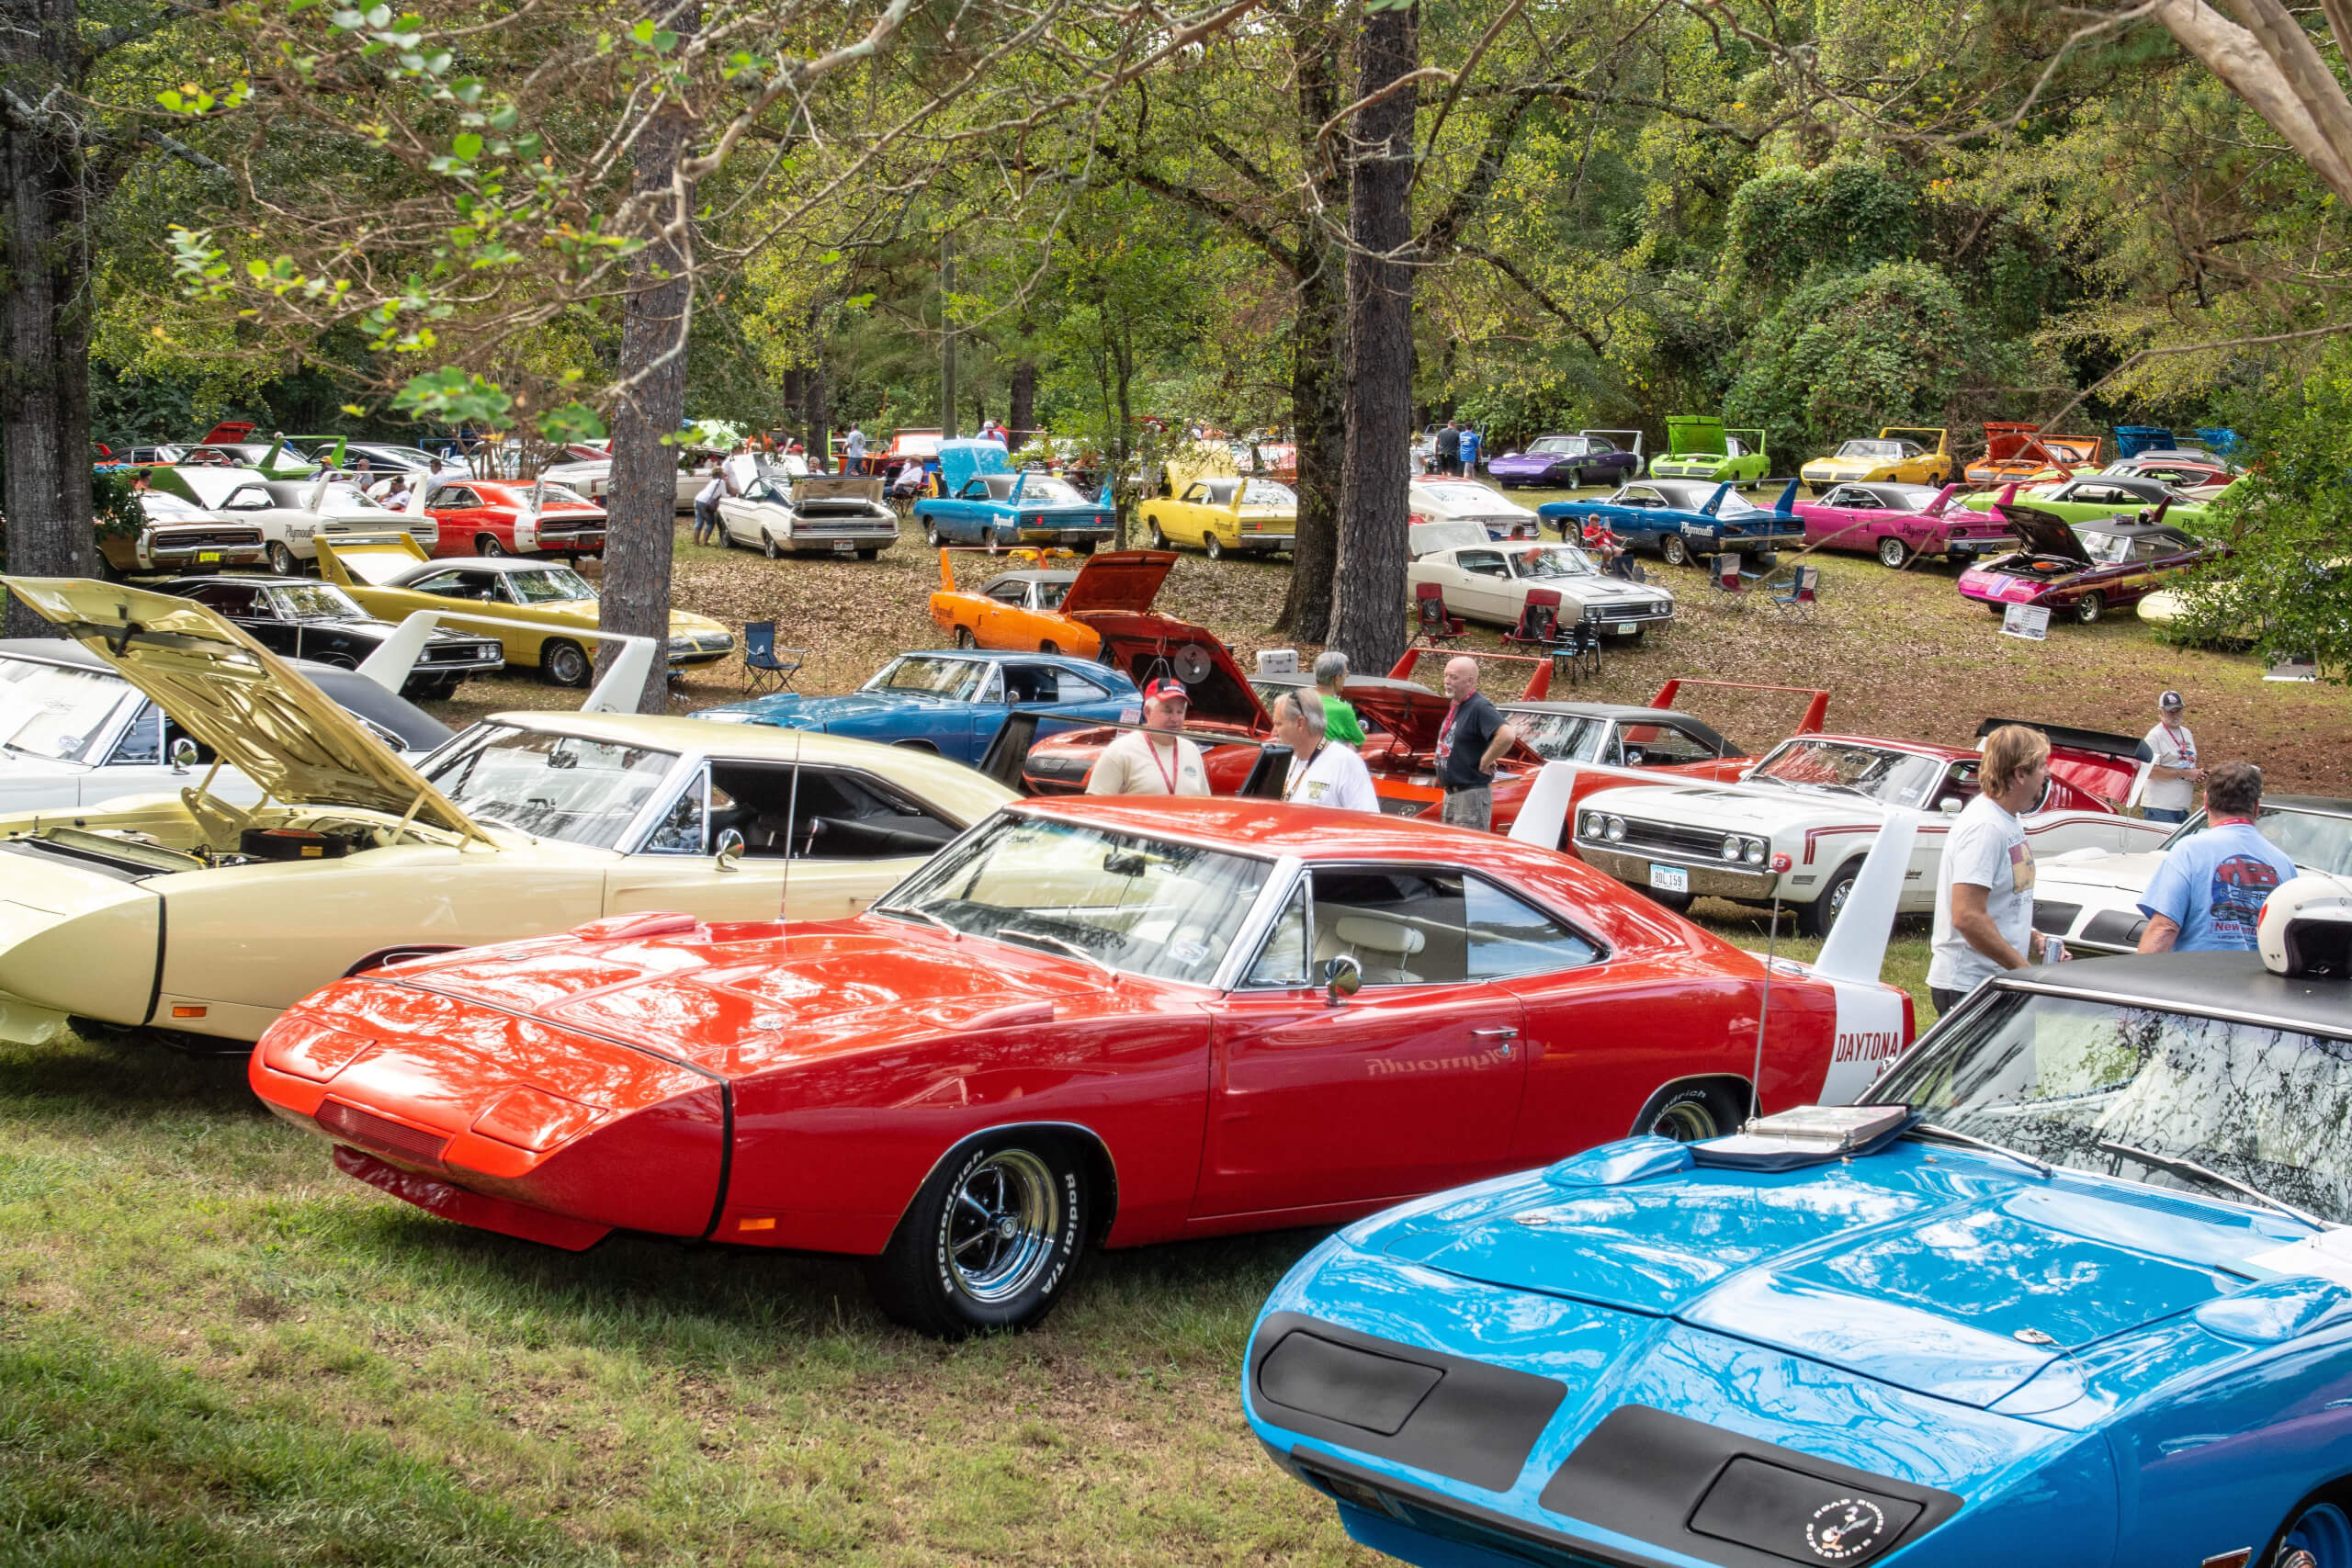 Scores of Plymouth Superbirds and Dodge Daytonas were on display at the 2019 Aero Warrior Reunion.